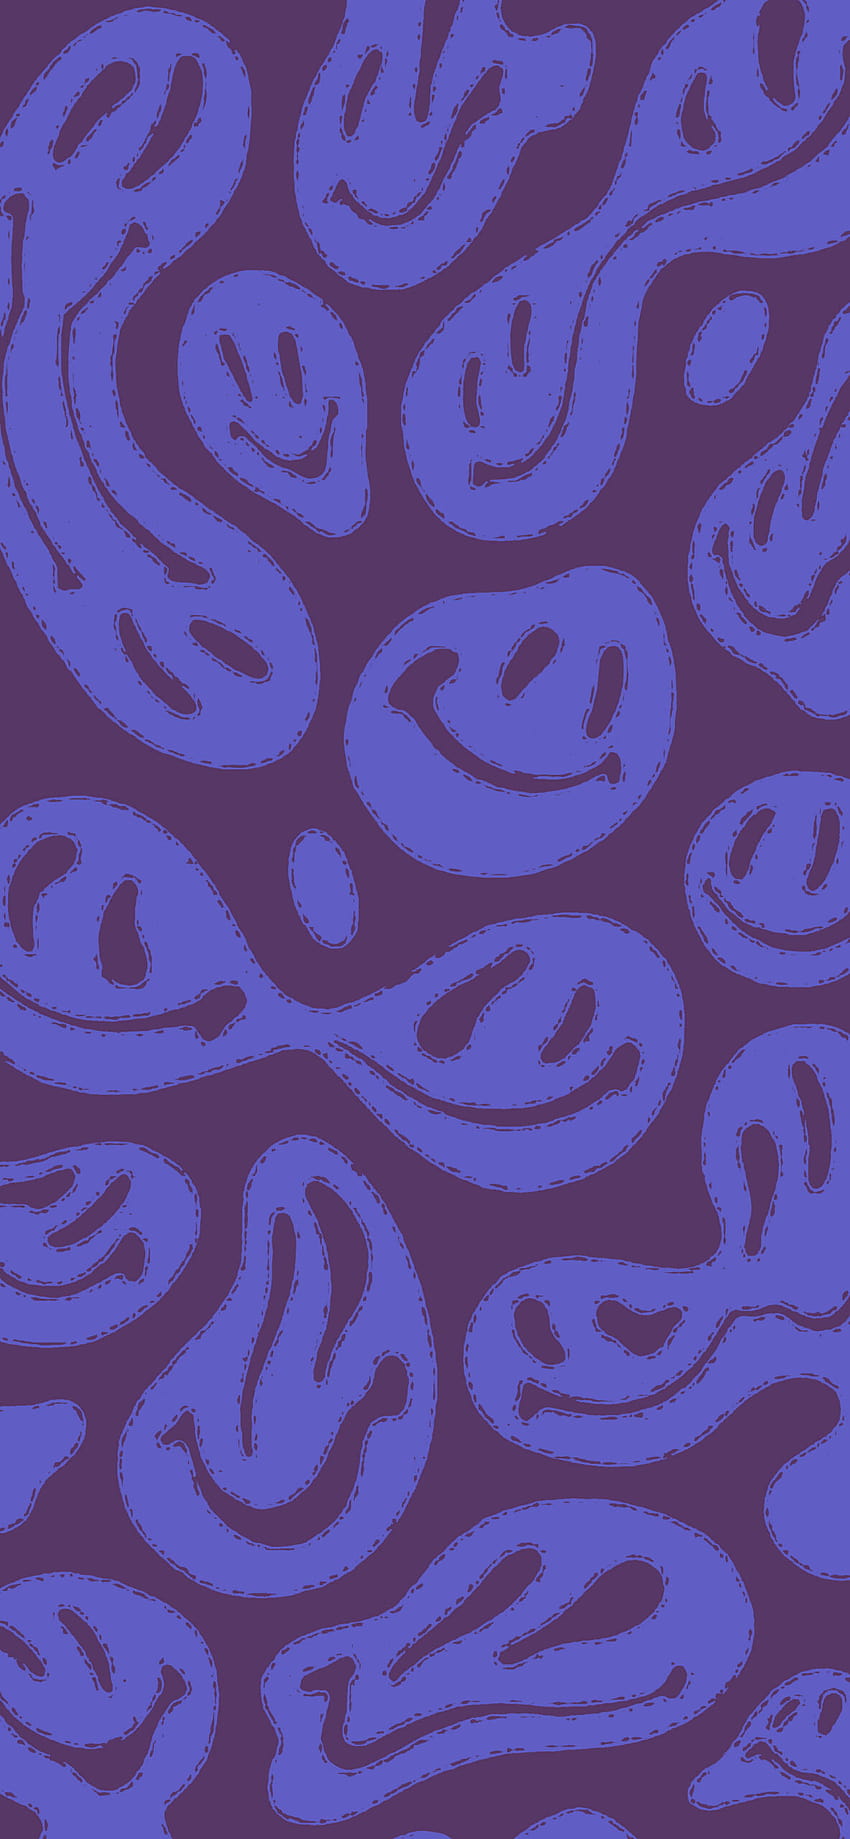 Purple Smiley Face Photographic Prints for Sale  Redbubble